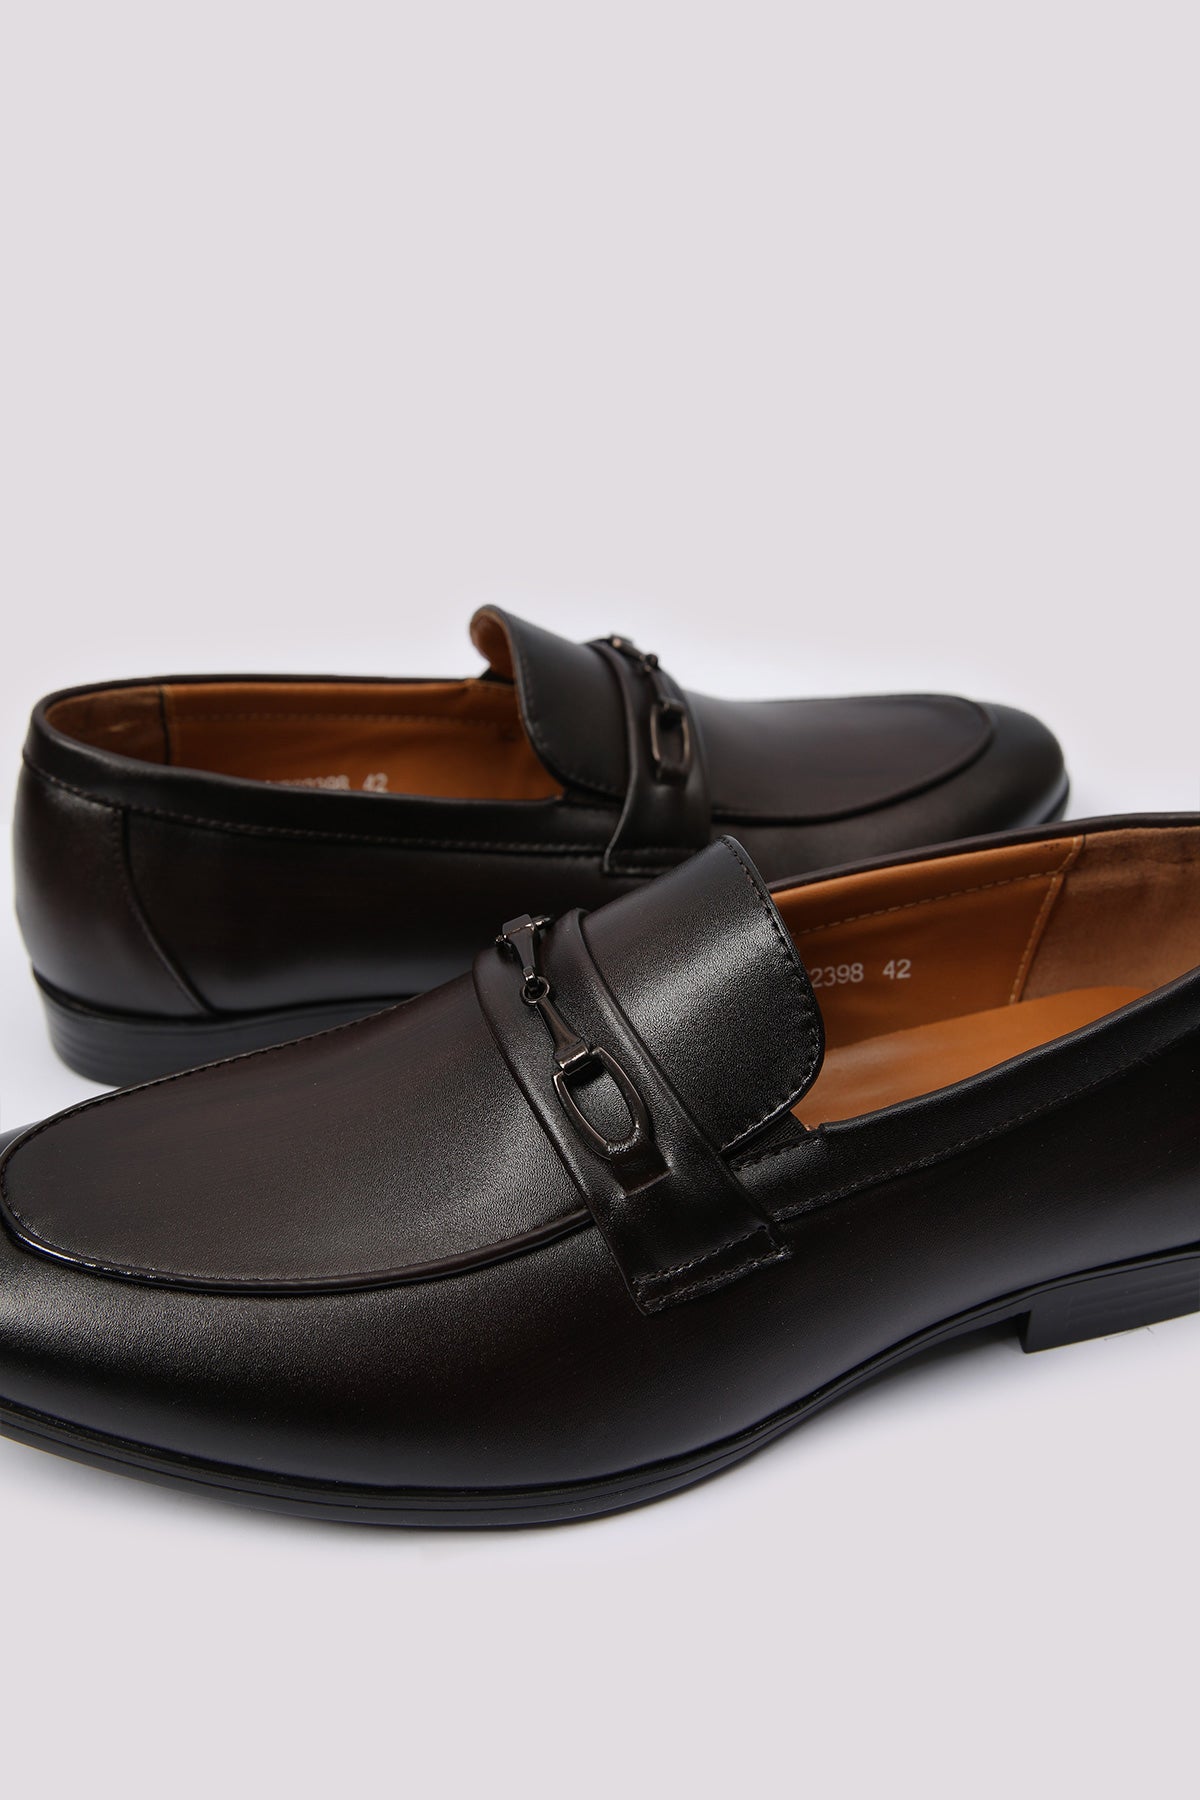 COFFEE SOFT LEATHER SHOES